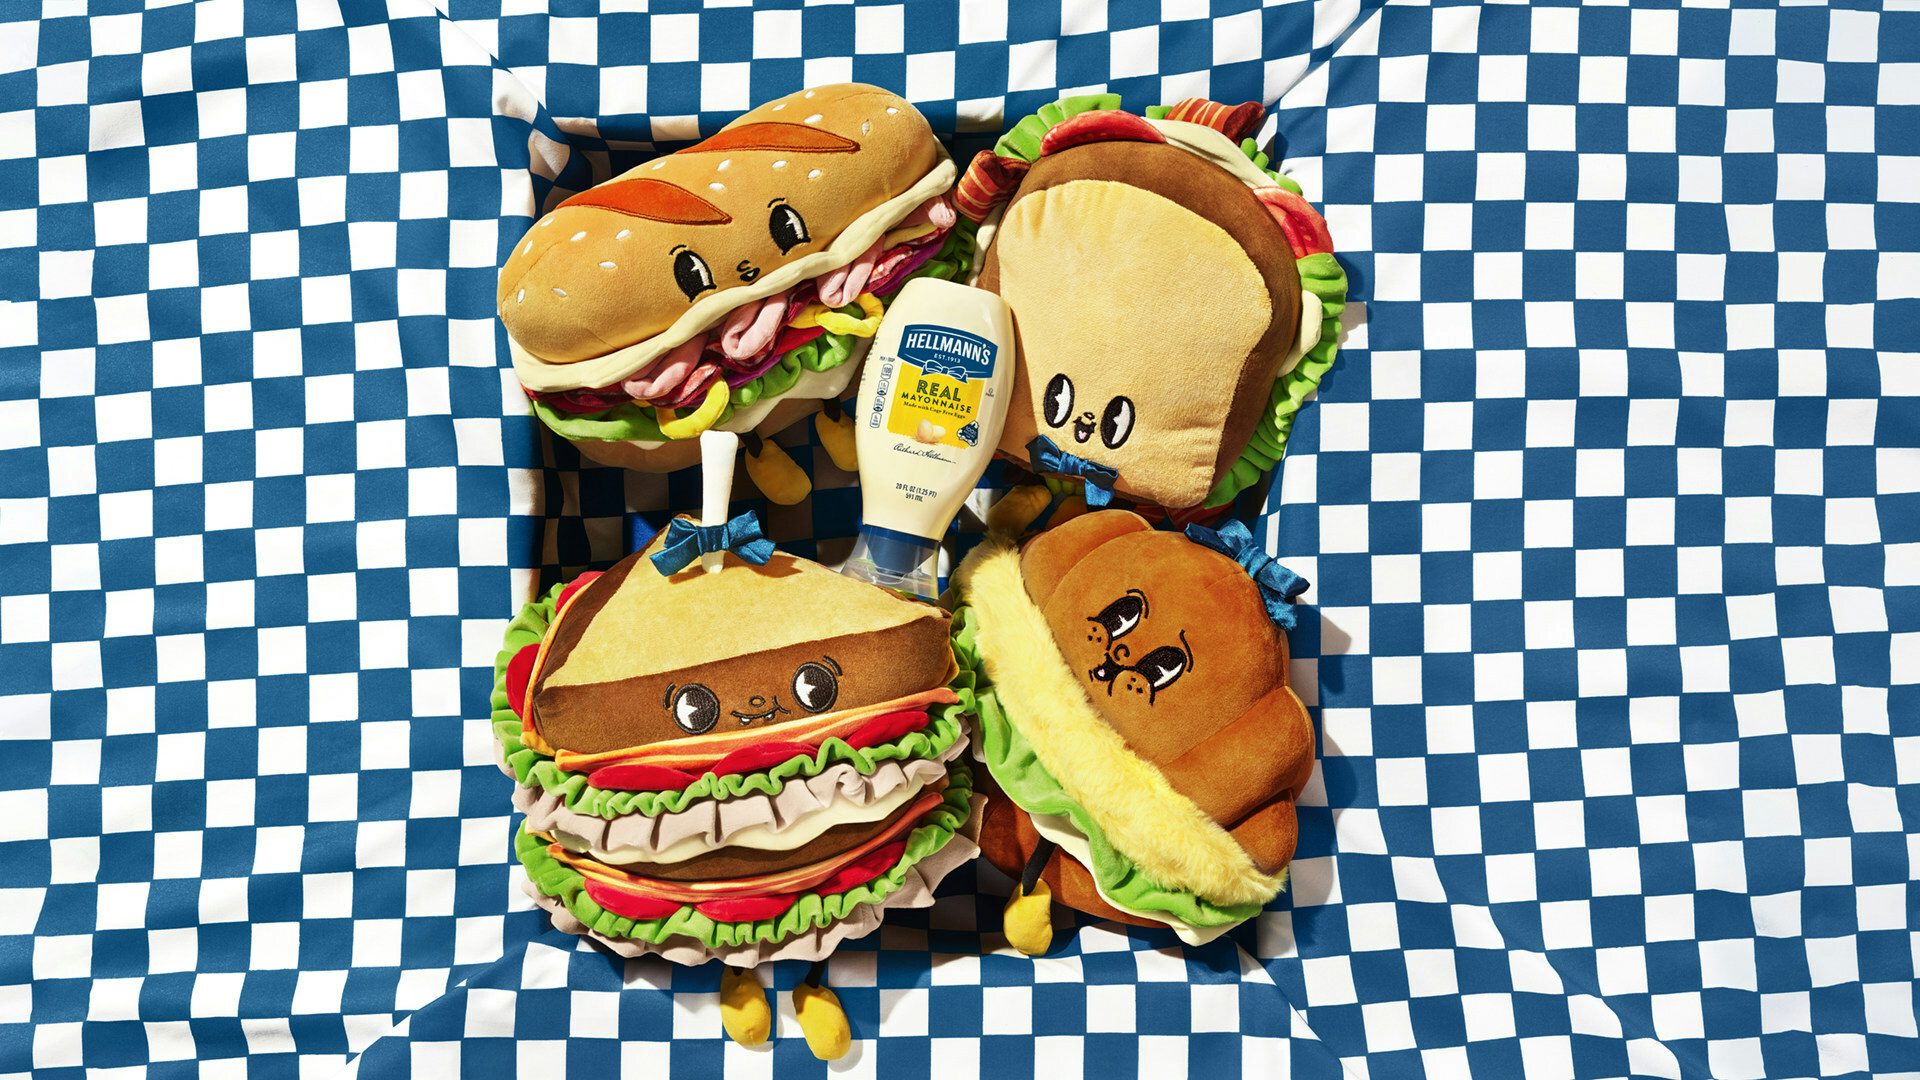 Plushie toys in the shape of sandwiches with a cartoonish smiling face